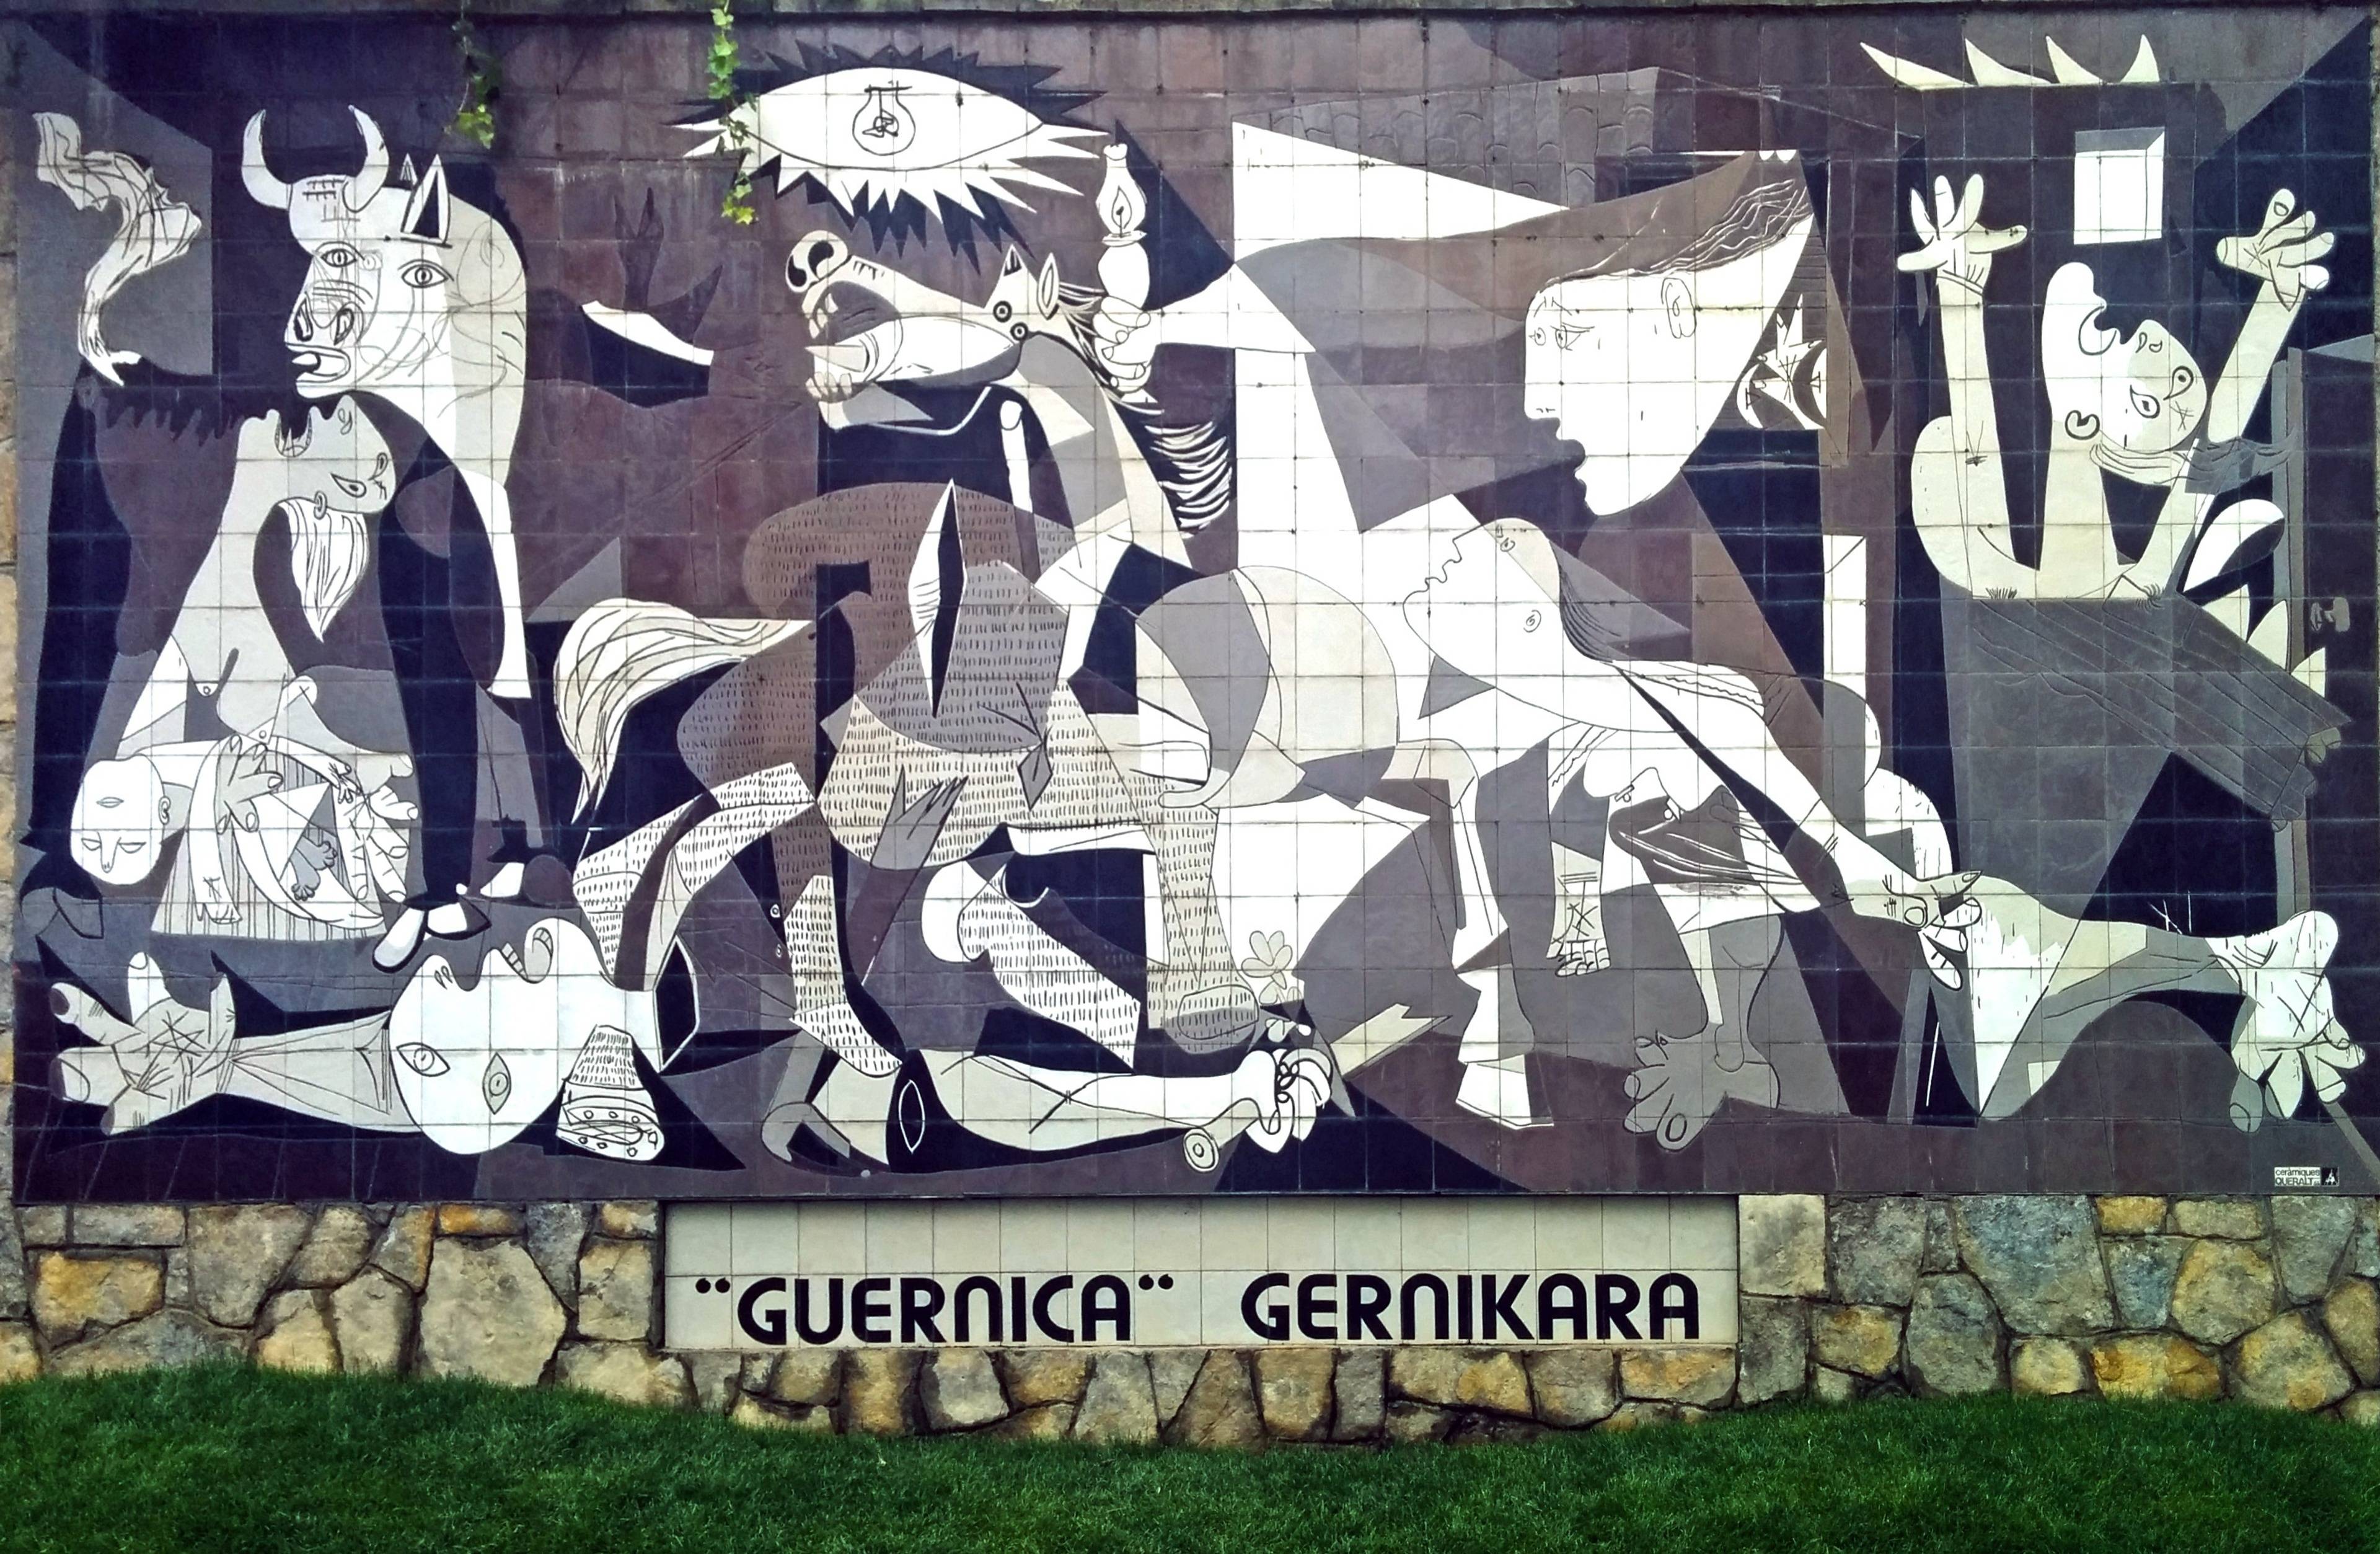 Reproduction of Guernica by Picasso